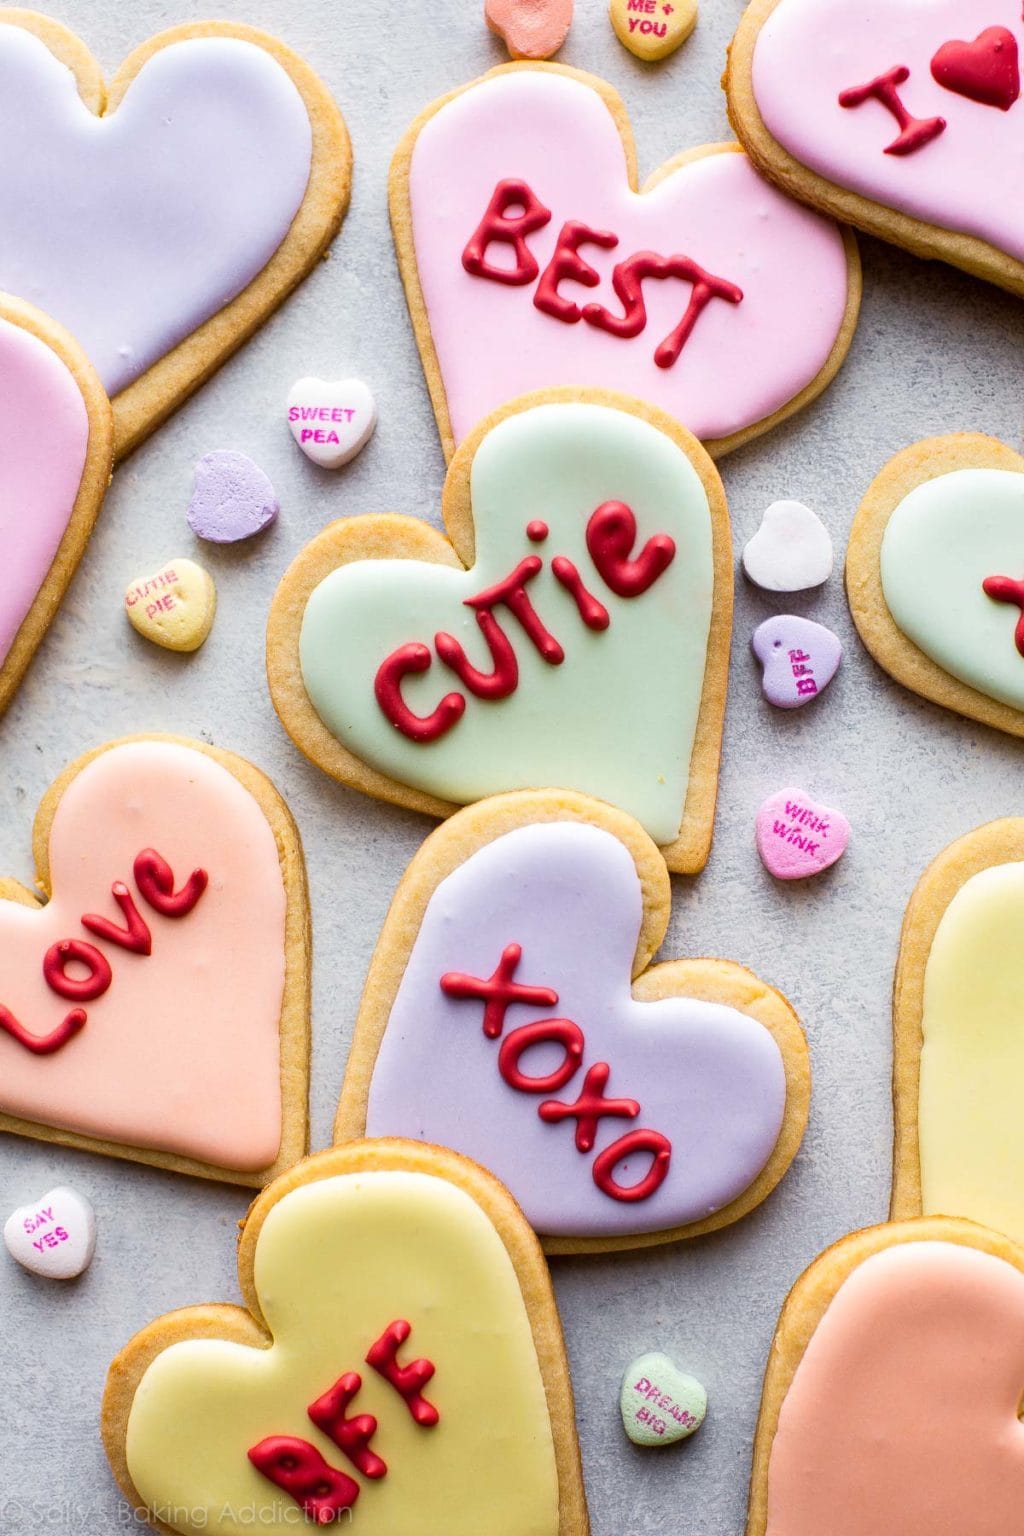 Colorful Valentine's Day Heart Cookies with text messaged piped onto them.